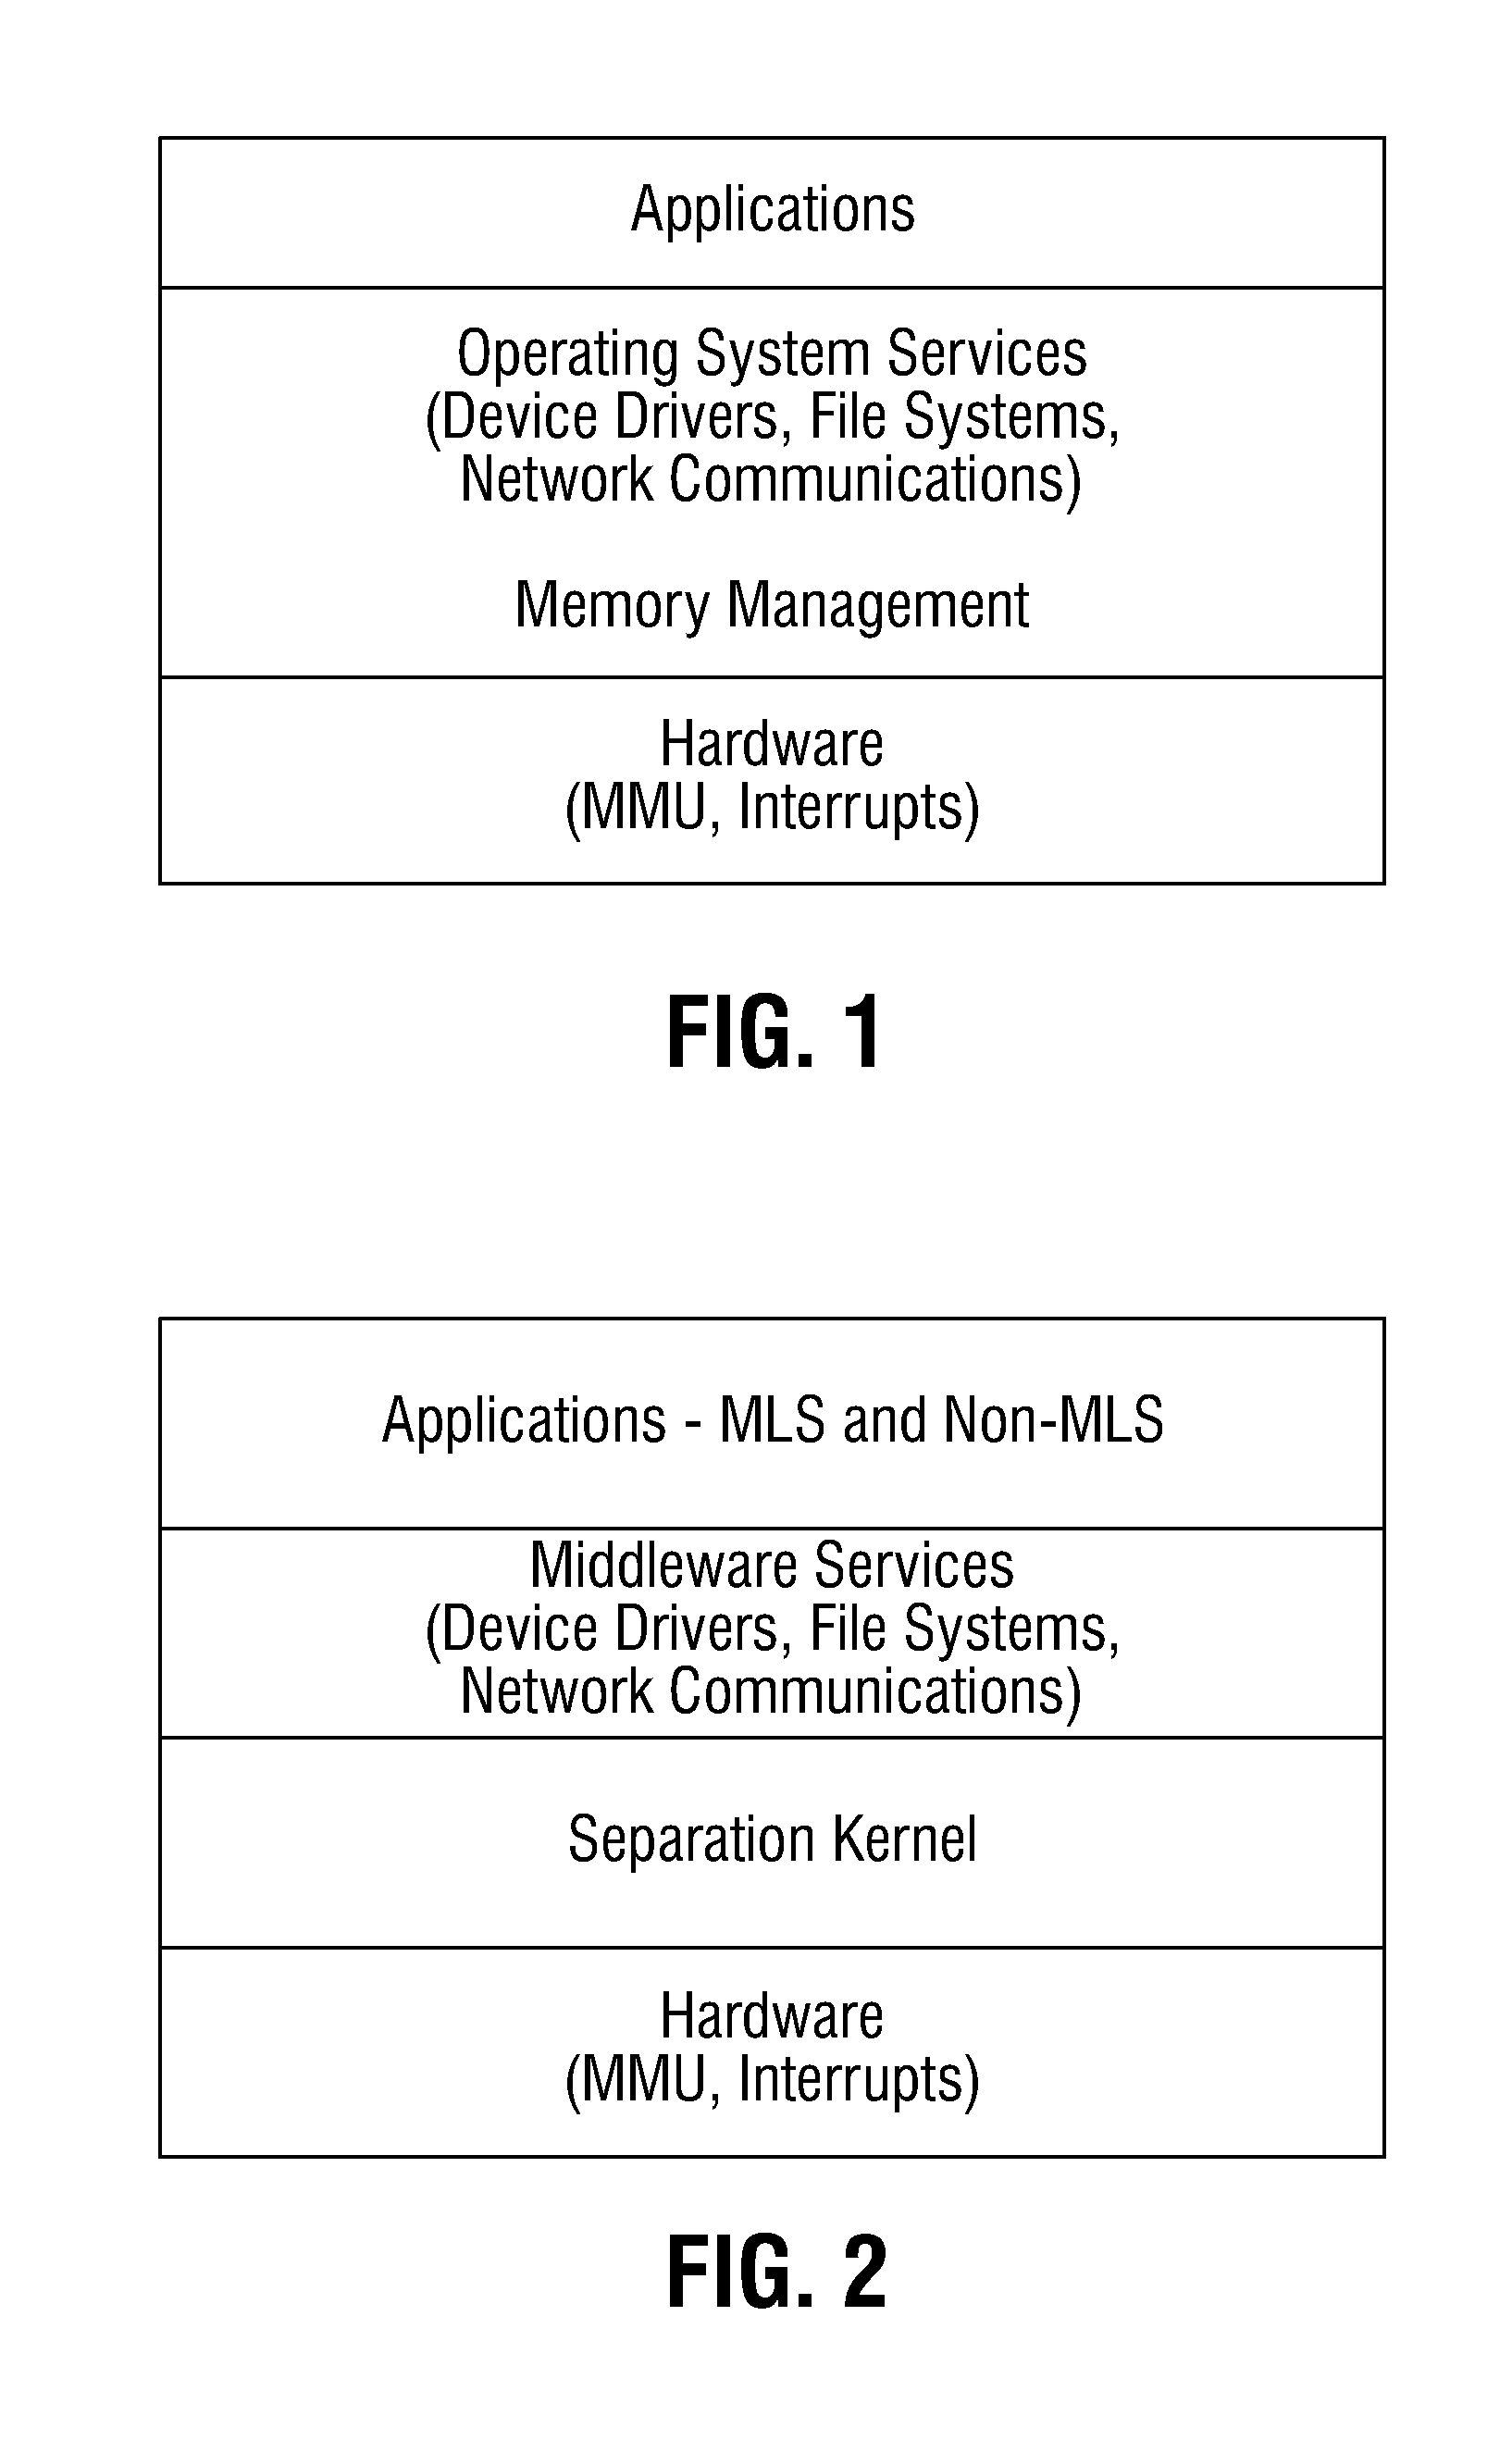 Multi-level security system for enabling secure file sharing across multiple security levels and method thereof